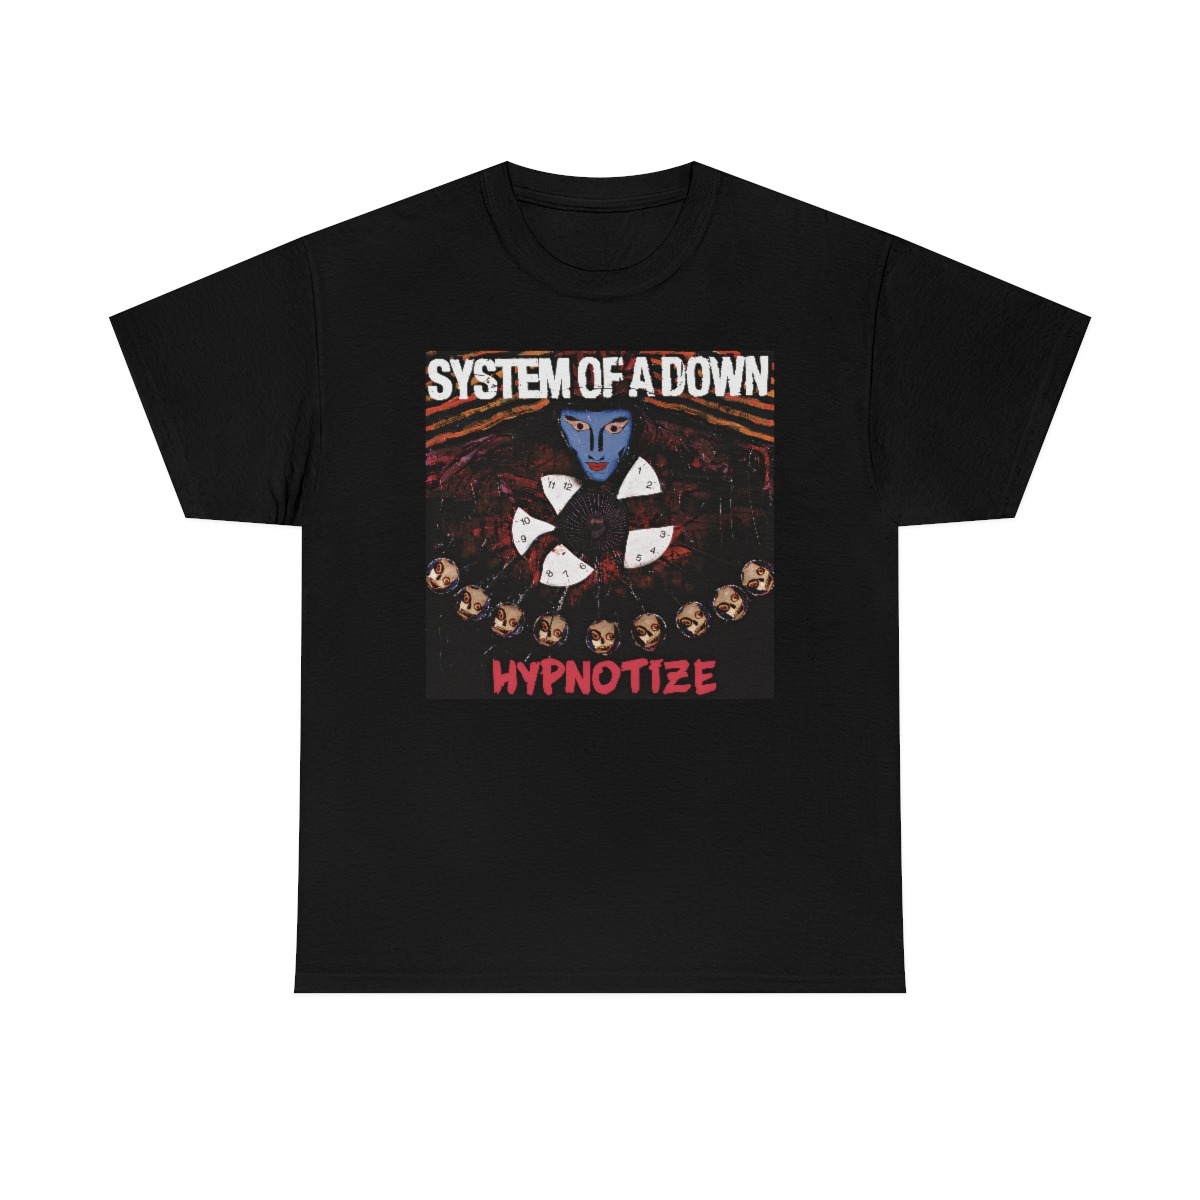 System of a Down t shirt - System of a Down Merch - System of a Down shirt - hypnotize - Black T-Shirt - graphic tee - Nu Metal t shirt - Rock t shirt